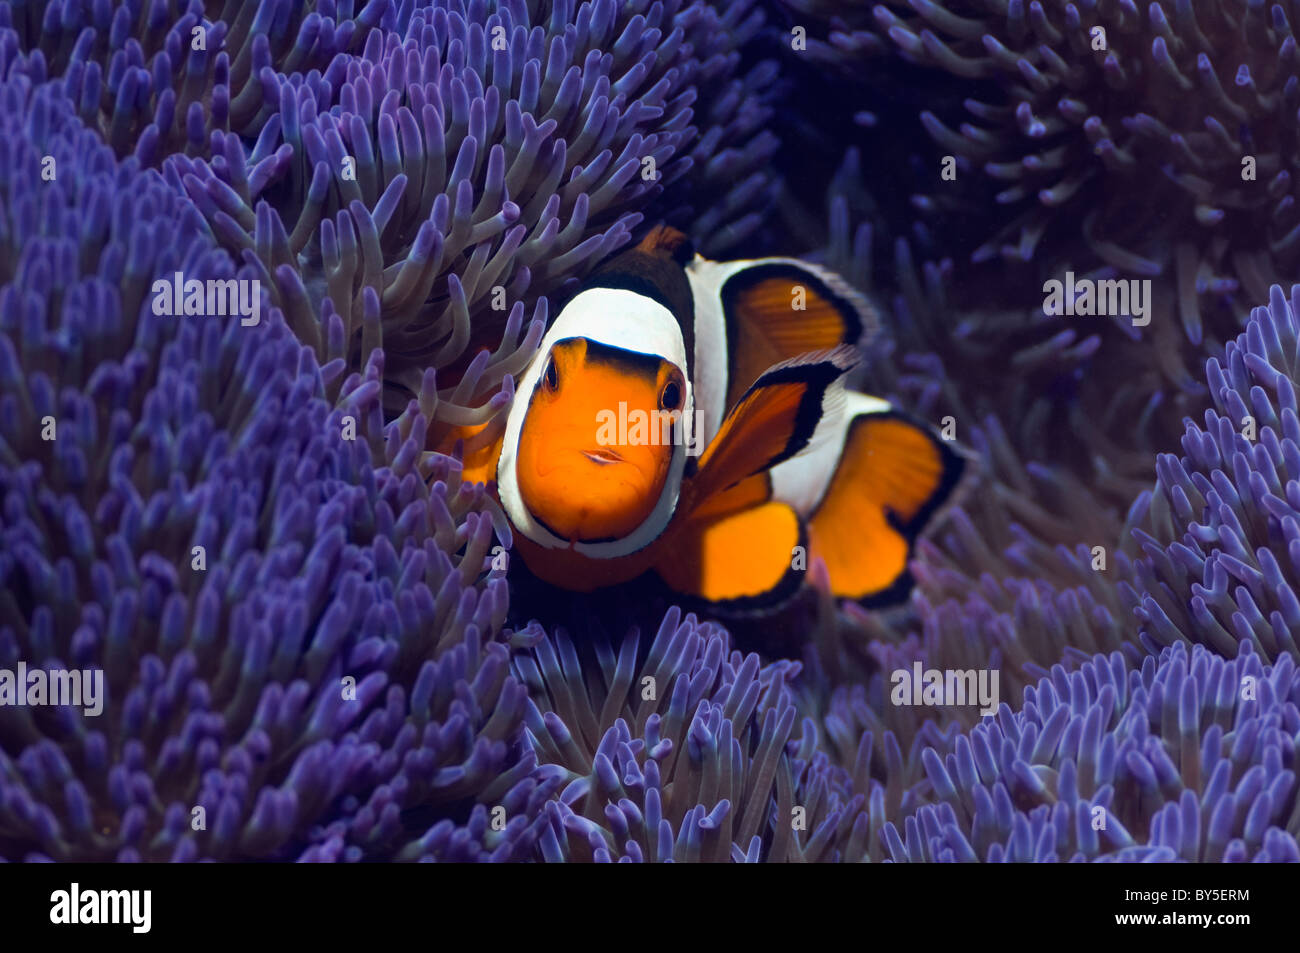 Clown anemonefish (Amphiprion percula) with blue variety of anemone (Stichodactyla gigantea). Stock Photo